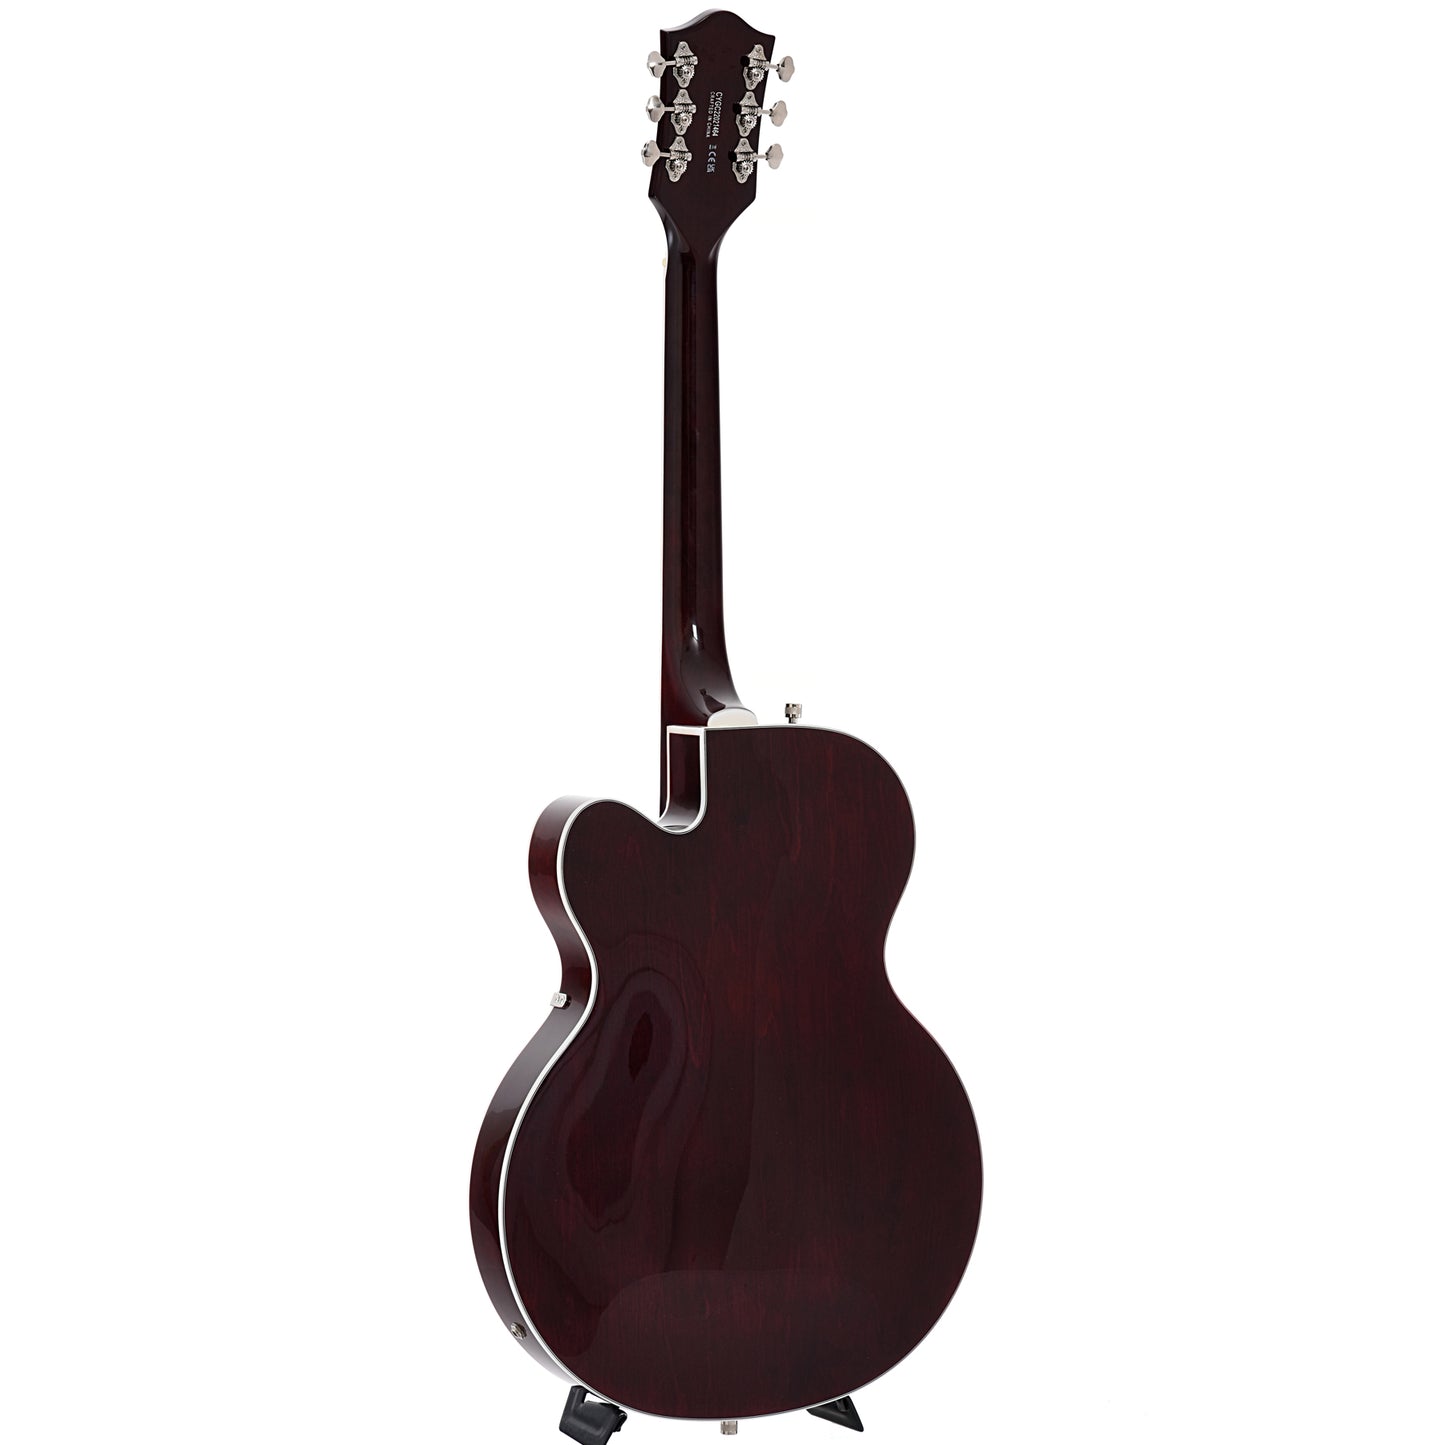 Image 12 of Gretsch G5420T Electromatic Classic Hollow Body Single Cut with Bigbsy, Walnut Stain- SKU# G5420T-WLNT : Product Type Hollow Body Electric Guitars : Elderly Instruments